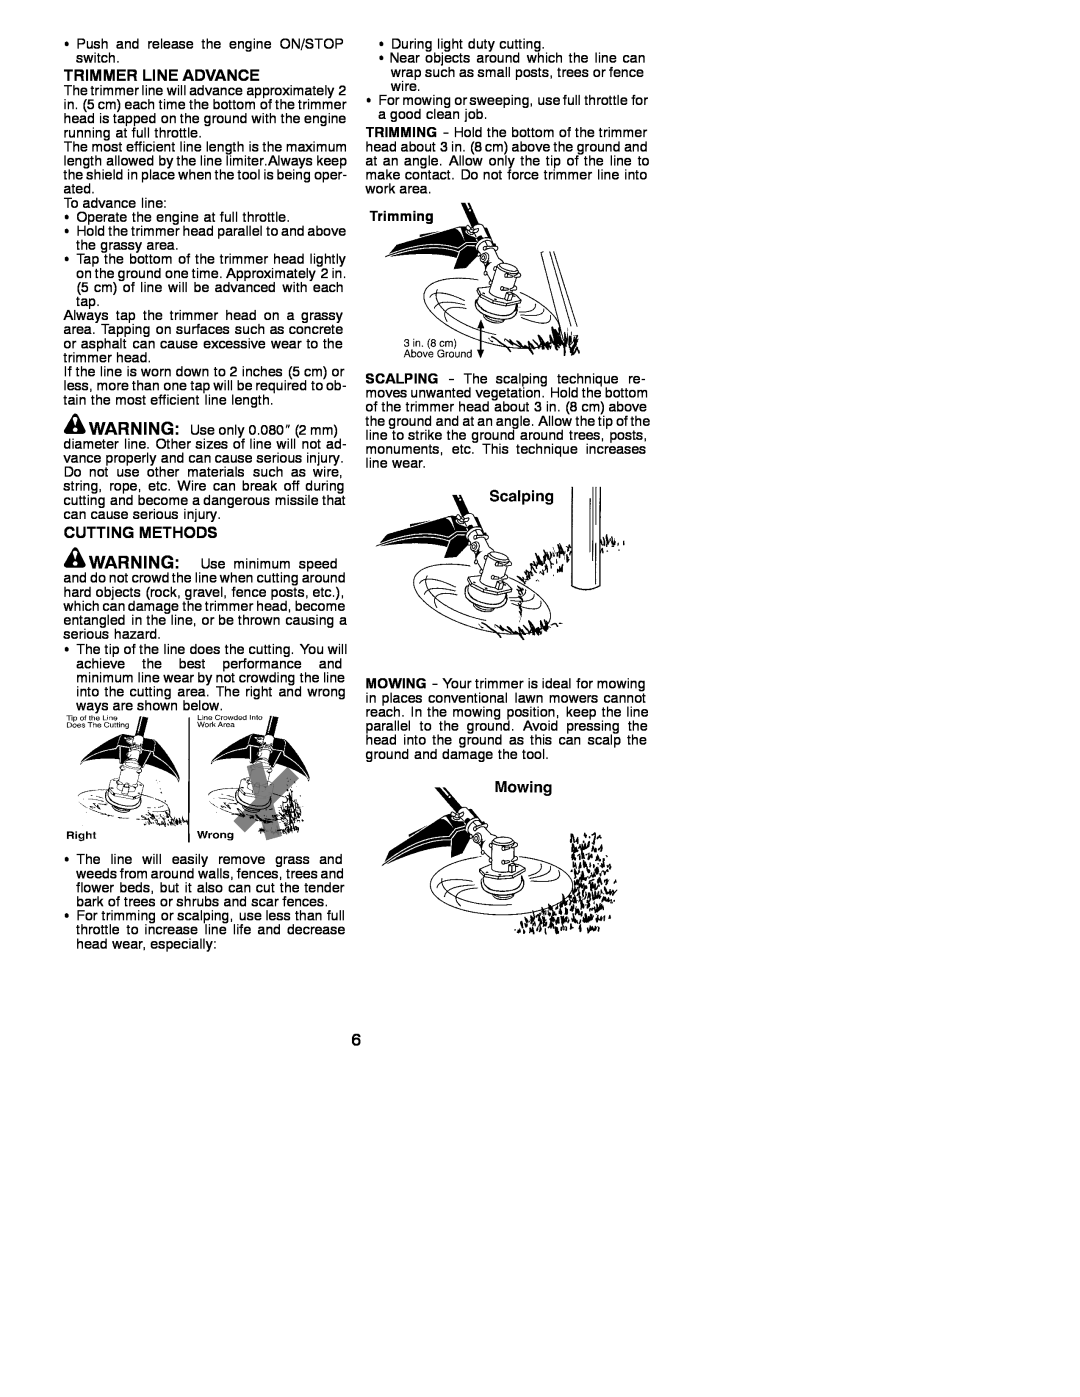 Weed Eater 530086928 instruction manual Trimmer Line Advance, Cutting Methods, Trimming 